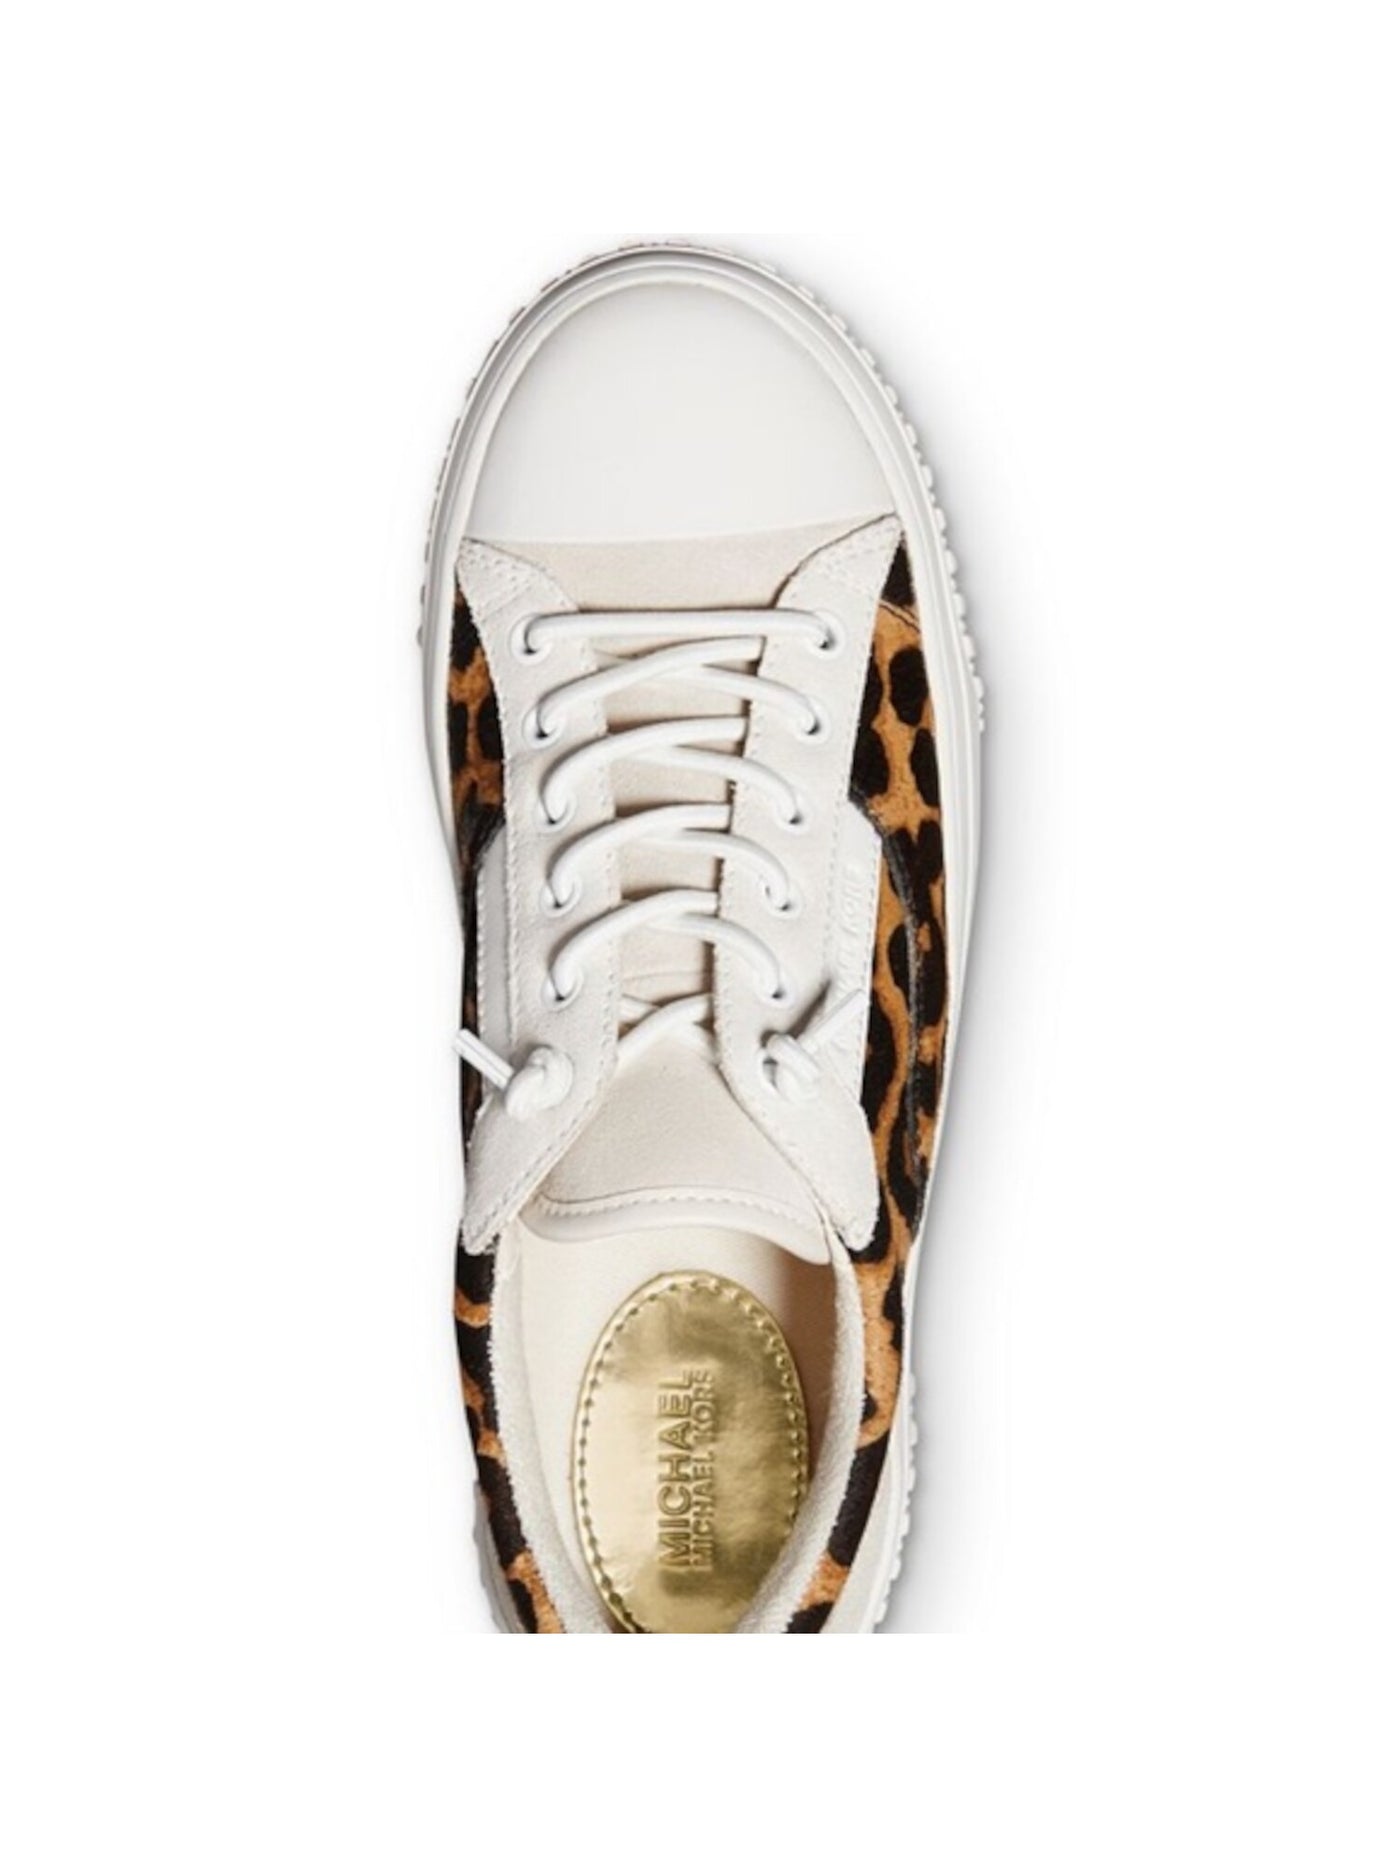 MICHAEL MICHAEL KORS Womens White Leopard Print Removable Insole Pull Tab Logo Oscar Round Toe Platform Lace-Up Leather Athletic Sneakers 8.5 M